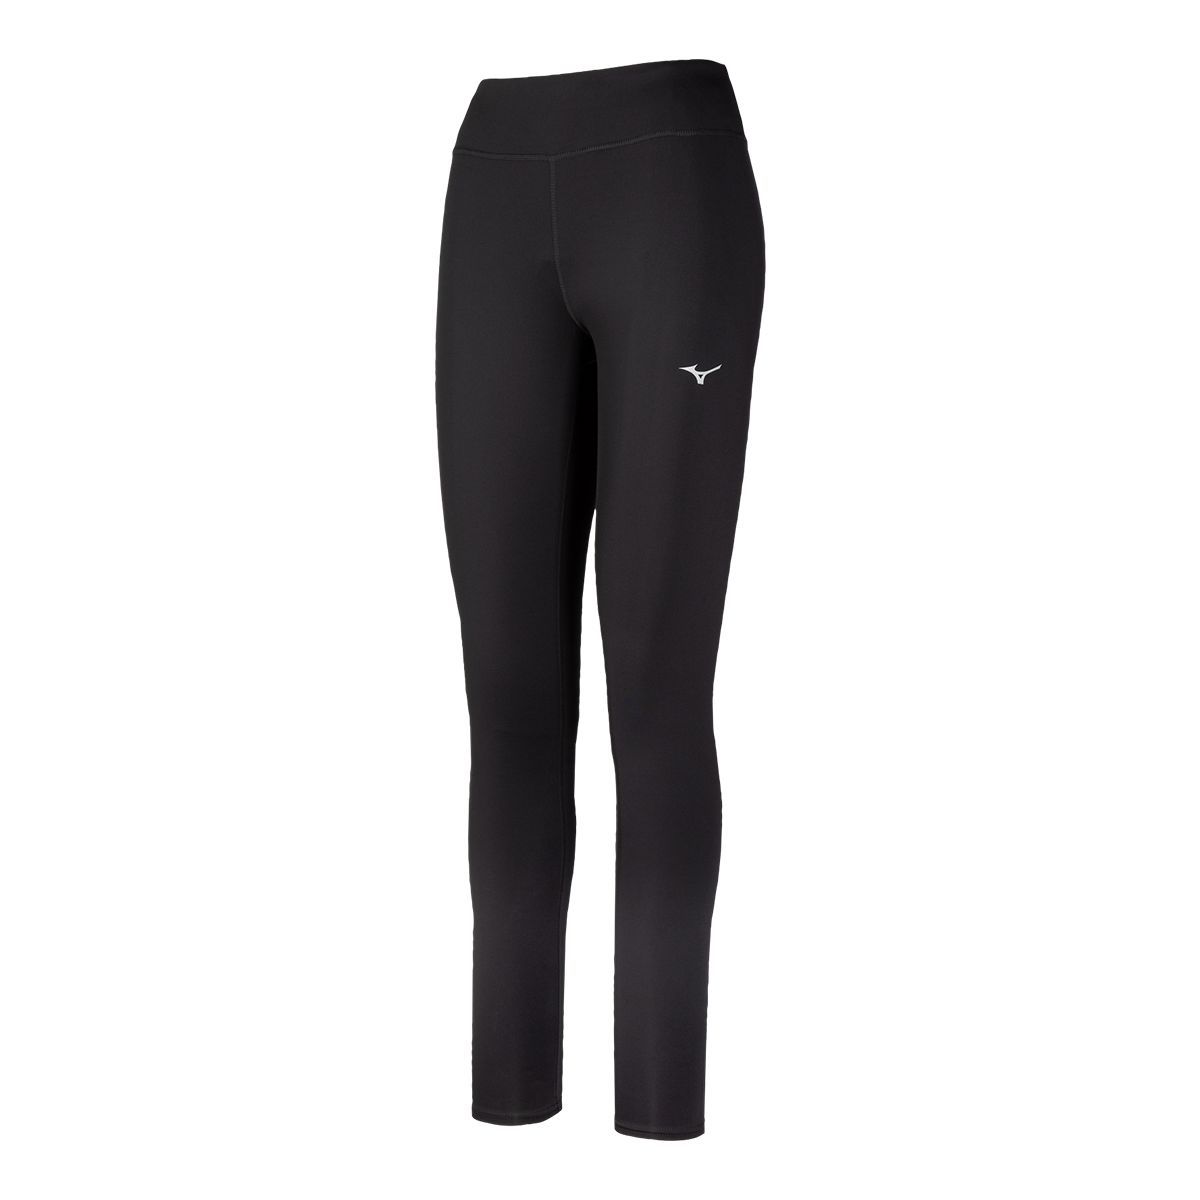 Full Price Volleyball InfinaSoft Pants & Tights.